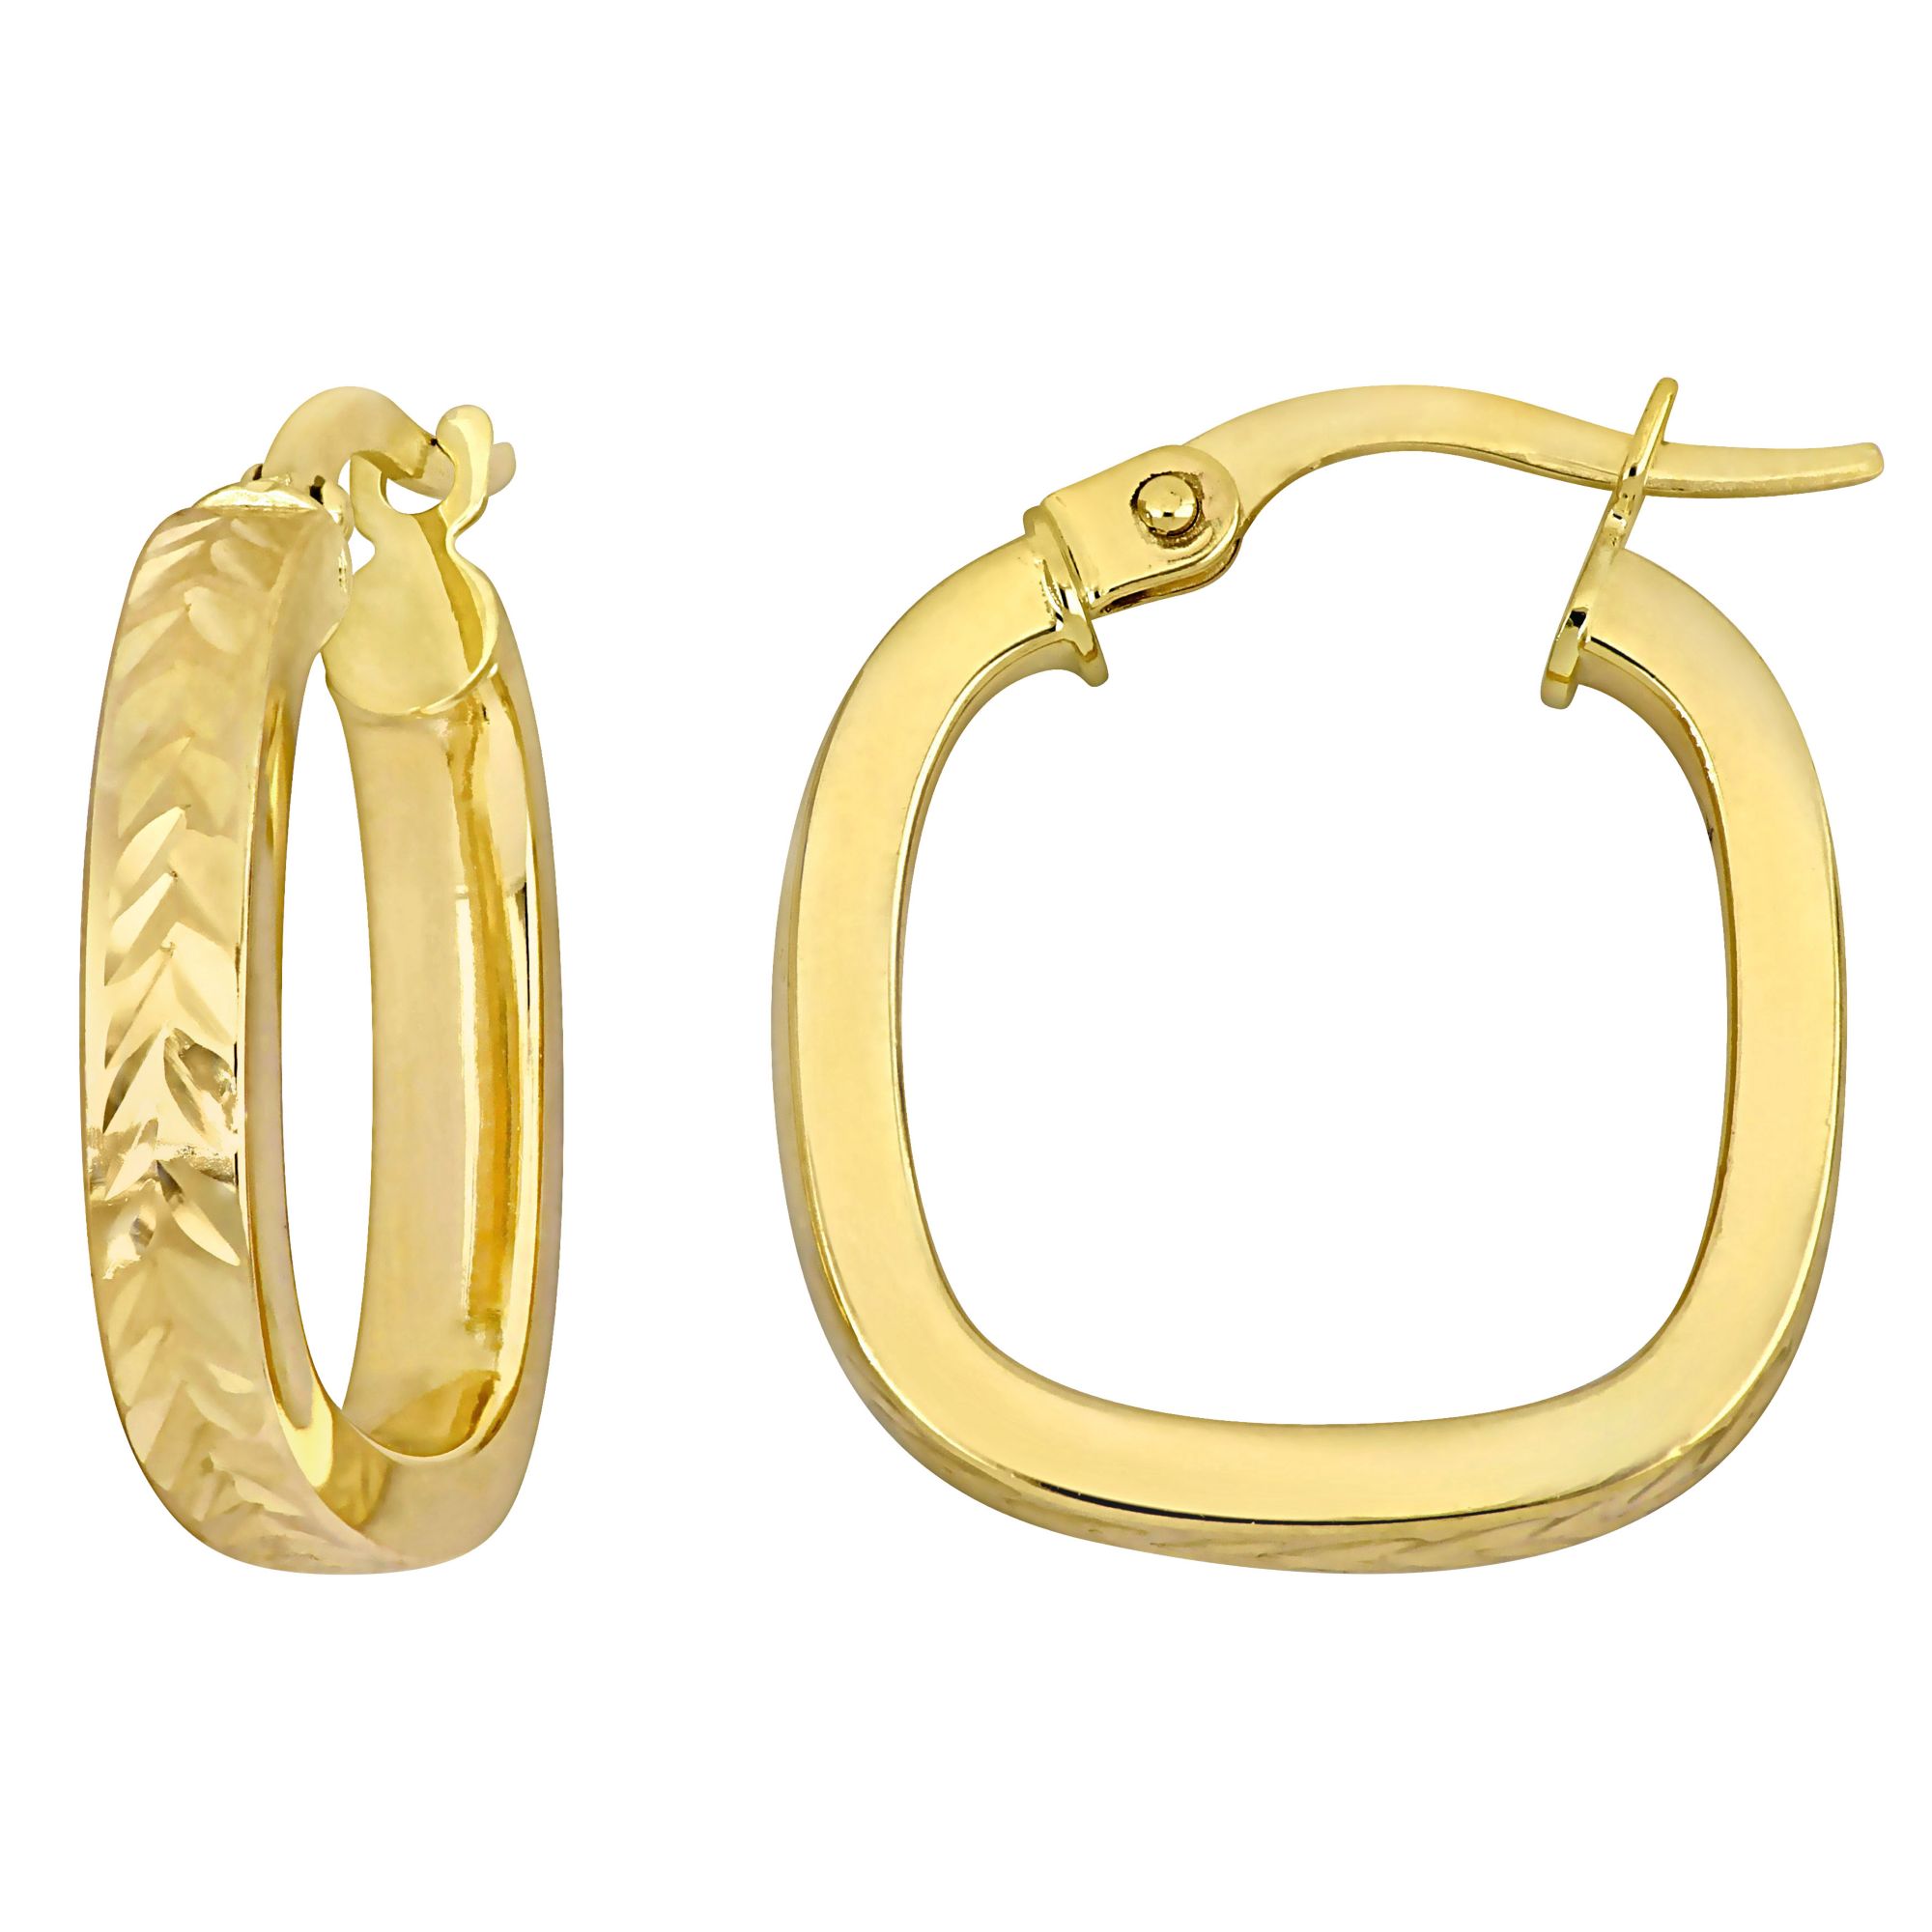 19mm Textured Square Hoop Earrings in 10k Yellow Gold